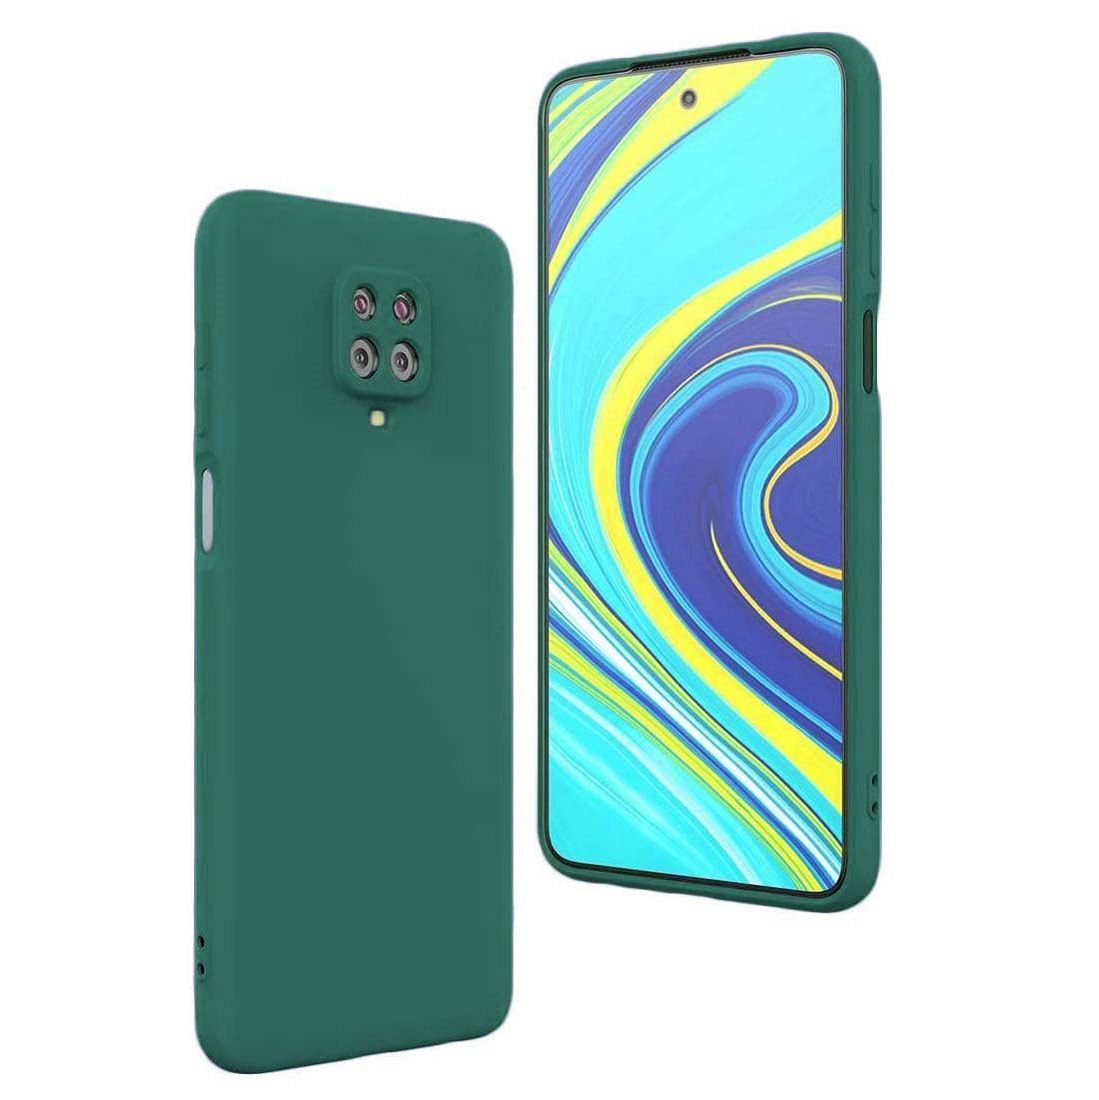     			JMA - Green Rubber Hybrid Covers Compatible For Xiaomi Redmi Note 9 Pro Max ( Pack of 1 )